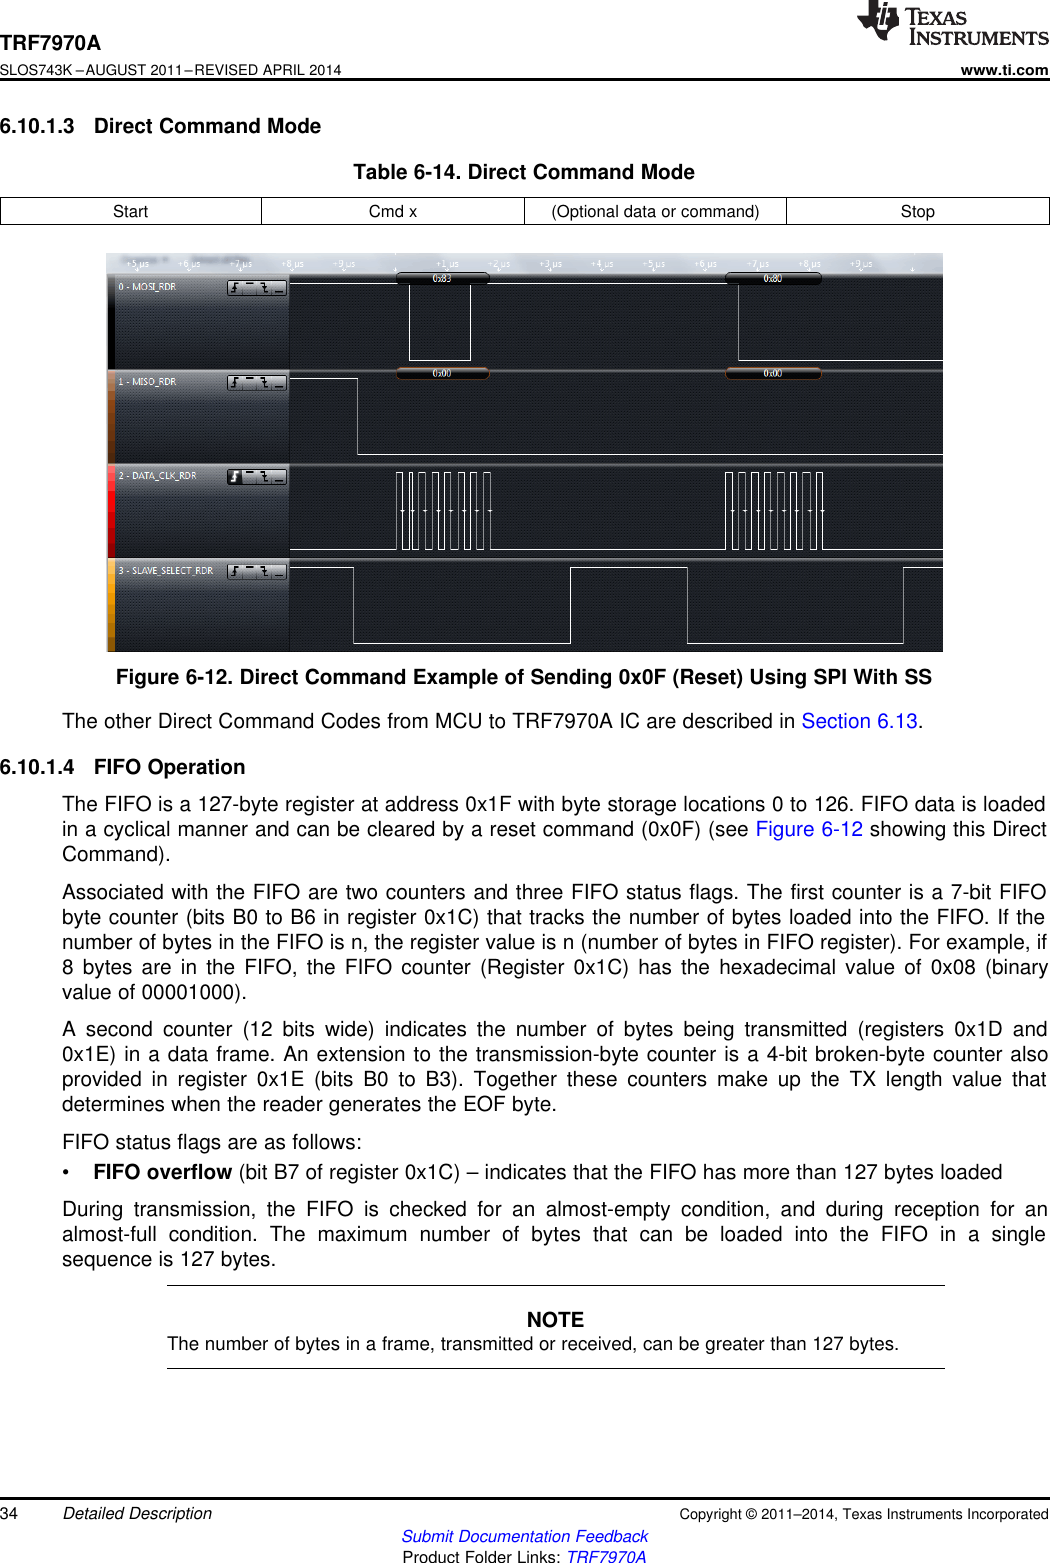 TRF7970ASLOS743K –AUGUST 2011–REVISED APRIL 2014www.ti.com6.10.1.3 Direct Command ModeTable 6-14. Direct Command ModeStart Cmd x (Optional data or command) StopFigure 6-12. Direct Command Example of Sending 0x0F (Reset) Using SPI With SSThe other Direct Command Codes from MCU to TRF7970A IC are described in Section 6.13.6.10.1.4 FIFO OperationThe FIFO is a 127-byte register at address 0x1F with byte storage locations 0 to 126. FIFO data is loadedin a cyclical manner and can be cleared by a reset command (0x0F) (see Figure 6-12 showing this DirectCommand).Associated with the FIFO are two counters and three FIFO status flags. The first counter is a 7-bit FIFObyte counter (bits B0 to B6 in register 0x1C) that tracks the number of bytes loaded into the FIFO. If thenumber of bytes in the FIFO is n, the register value is n (number of bytes in FIFO register). For example, if8 bytes are in the FIFO, the FIFO counter (Register 0x1C) has the hexadecimal value of 0x08 (binaryvalue of 00001000).A second counter (12 bits wide) indicates the number of bytes being transmitted (registers 0x1D and0x1E) in a data frame. An extension to the transmission-byte counter is a 4-bit broken-byte counter alsoprovided in register 0x1E (bits B0 to B3). Together these counters make up the TX length value thatdetermines when the reader generates the EOF byte.FIFO status flags are as follows:•FIFO overflow (bit B7 of register 0x1C) – indicates that the FIFO has more than 127 bytes loadedDuring transmission, the FIFO is checked for an almost-empty condition, and during reception for analmost-full condition. The maximum number of bytes that can be loaded into the FIFO in a singlesequence is 127 bytes.NOTEThe number of bytes in a frame, transmitted or received, can be greater than 127 bytes.34 Detailed Description Copyright © 2011–2014, Texas Instruments IncorporatedSubmit Documentation FeedbackProduct Folder Links: TRF7970A